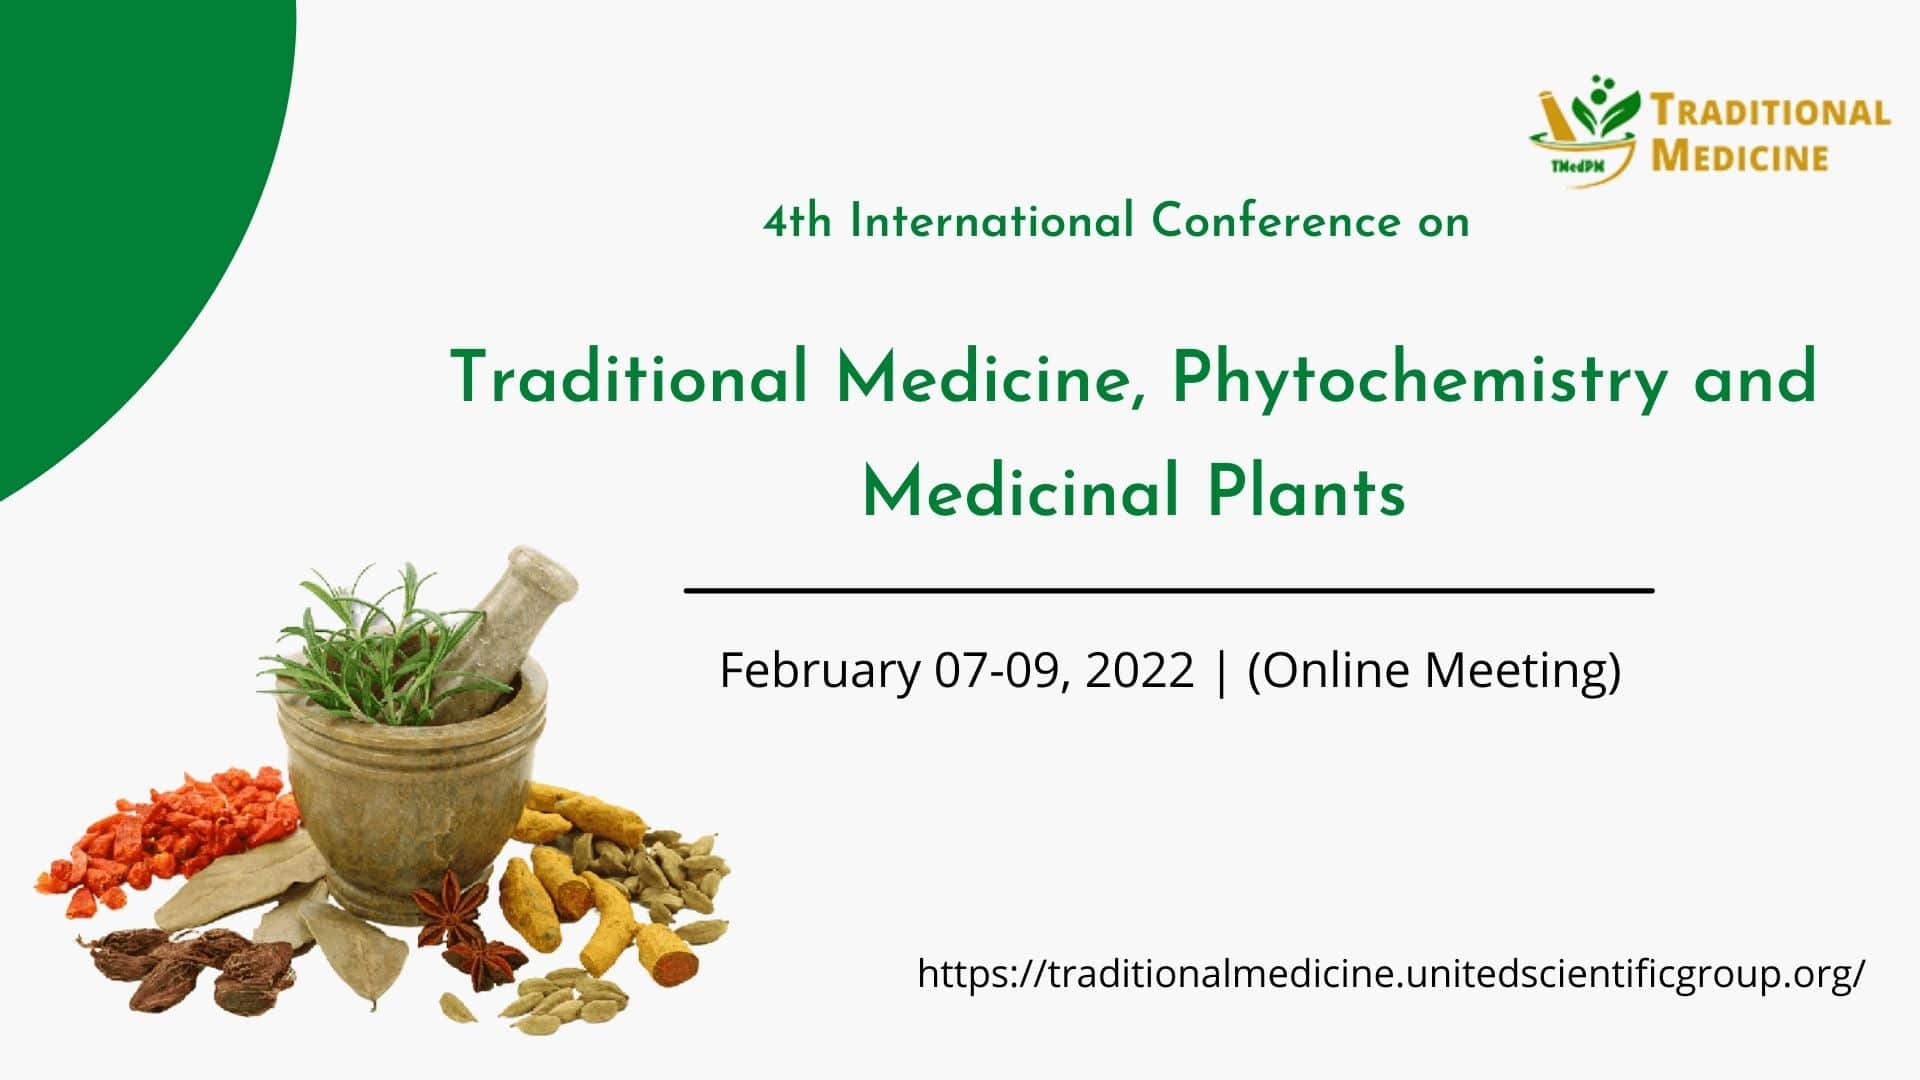 4th International Conference on Traditional Medicine, Phytochemistry and Medicinal Plants